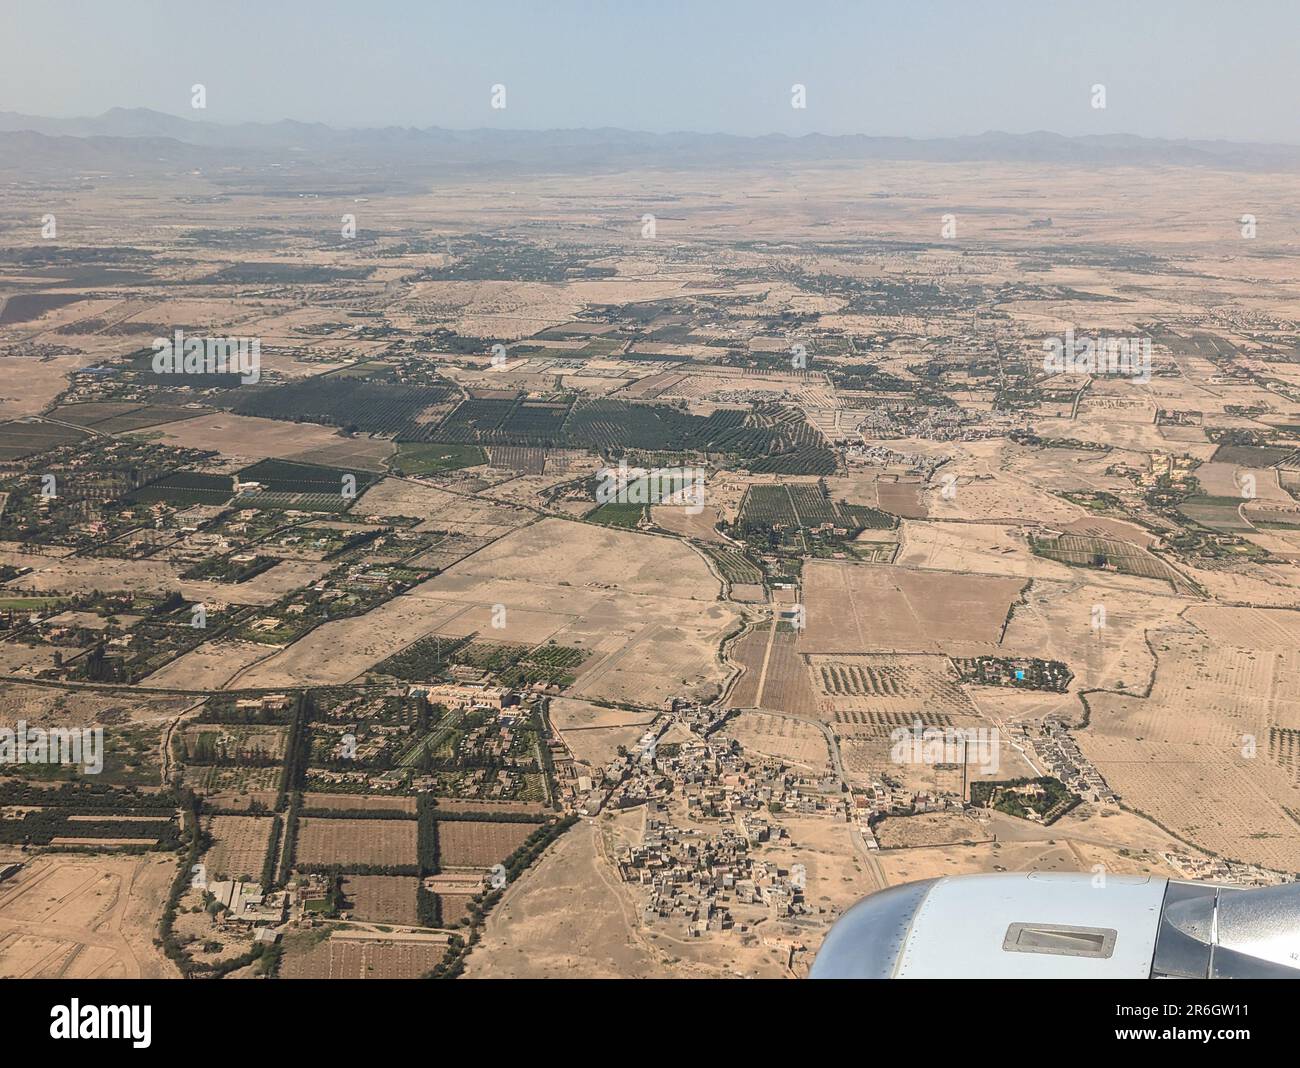 Aerial view of the Moroccan landscape and Marrakesh seen from an airplane Stock Photo